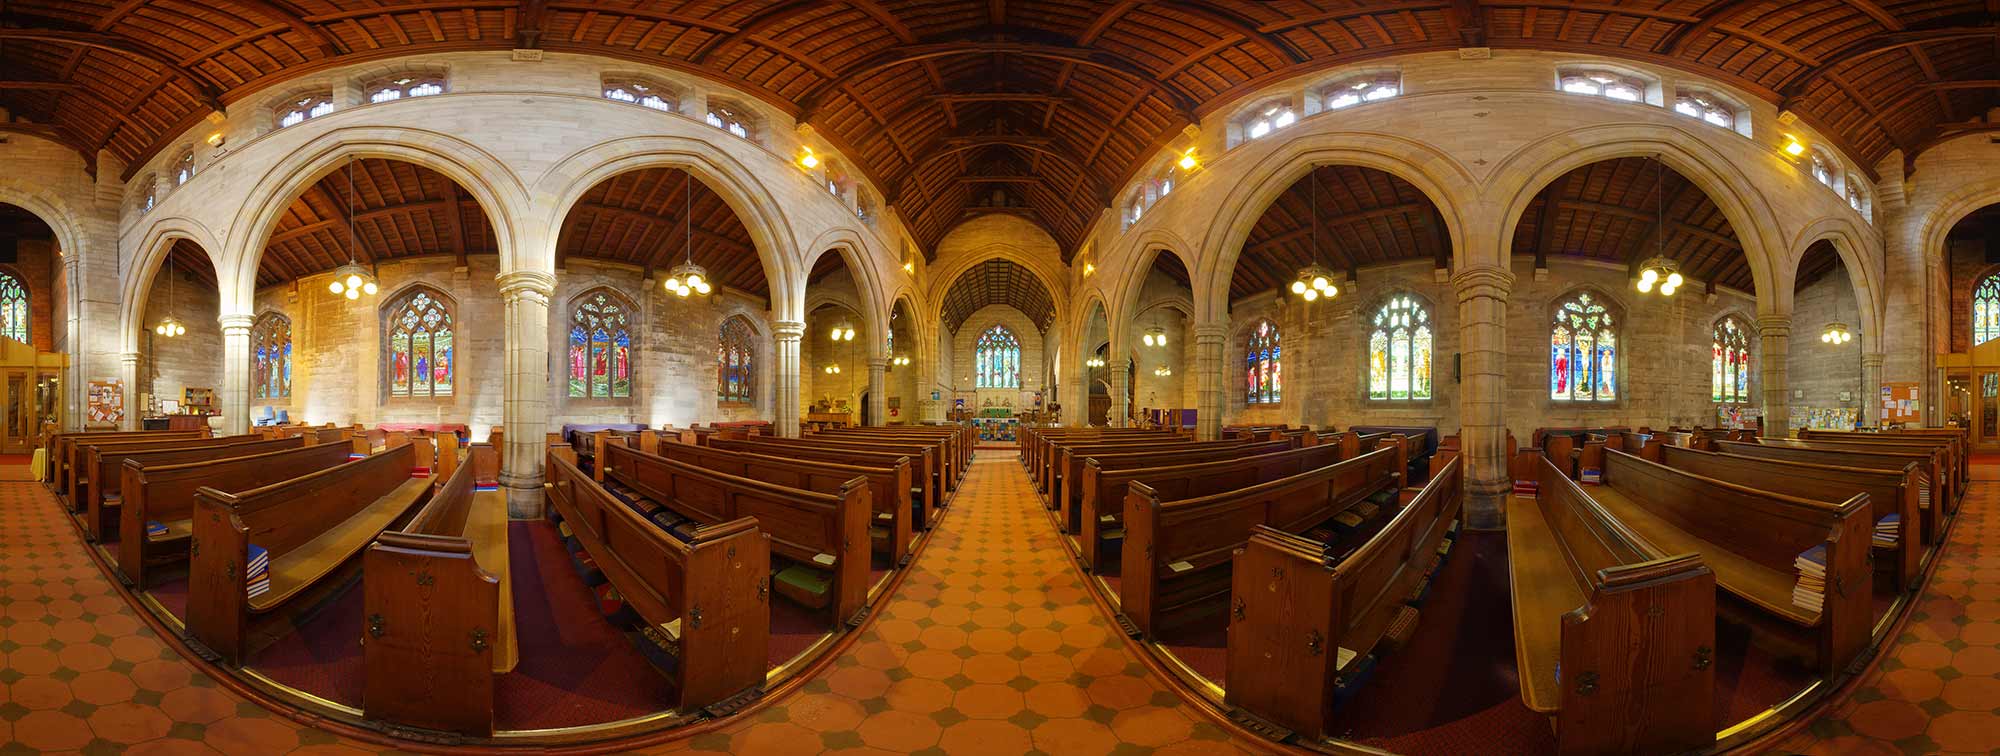 360° Panoramic Virtual Tour Photography of All Hallows in Liverpool